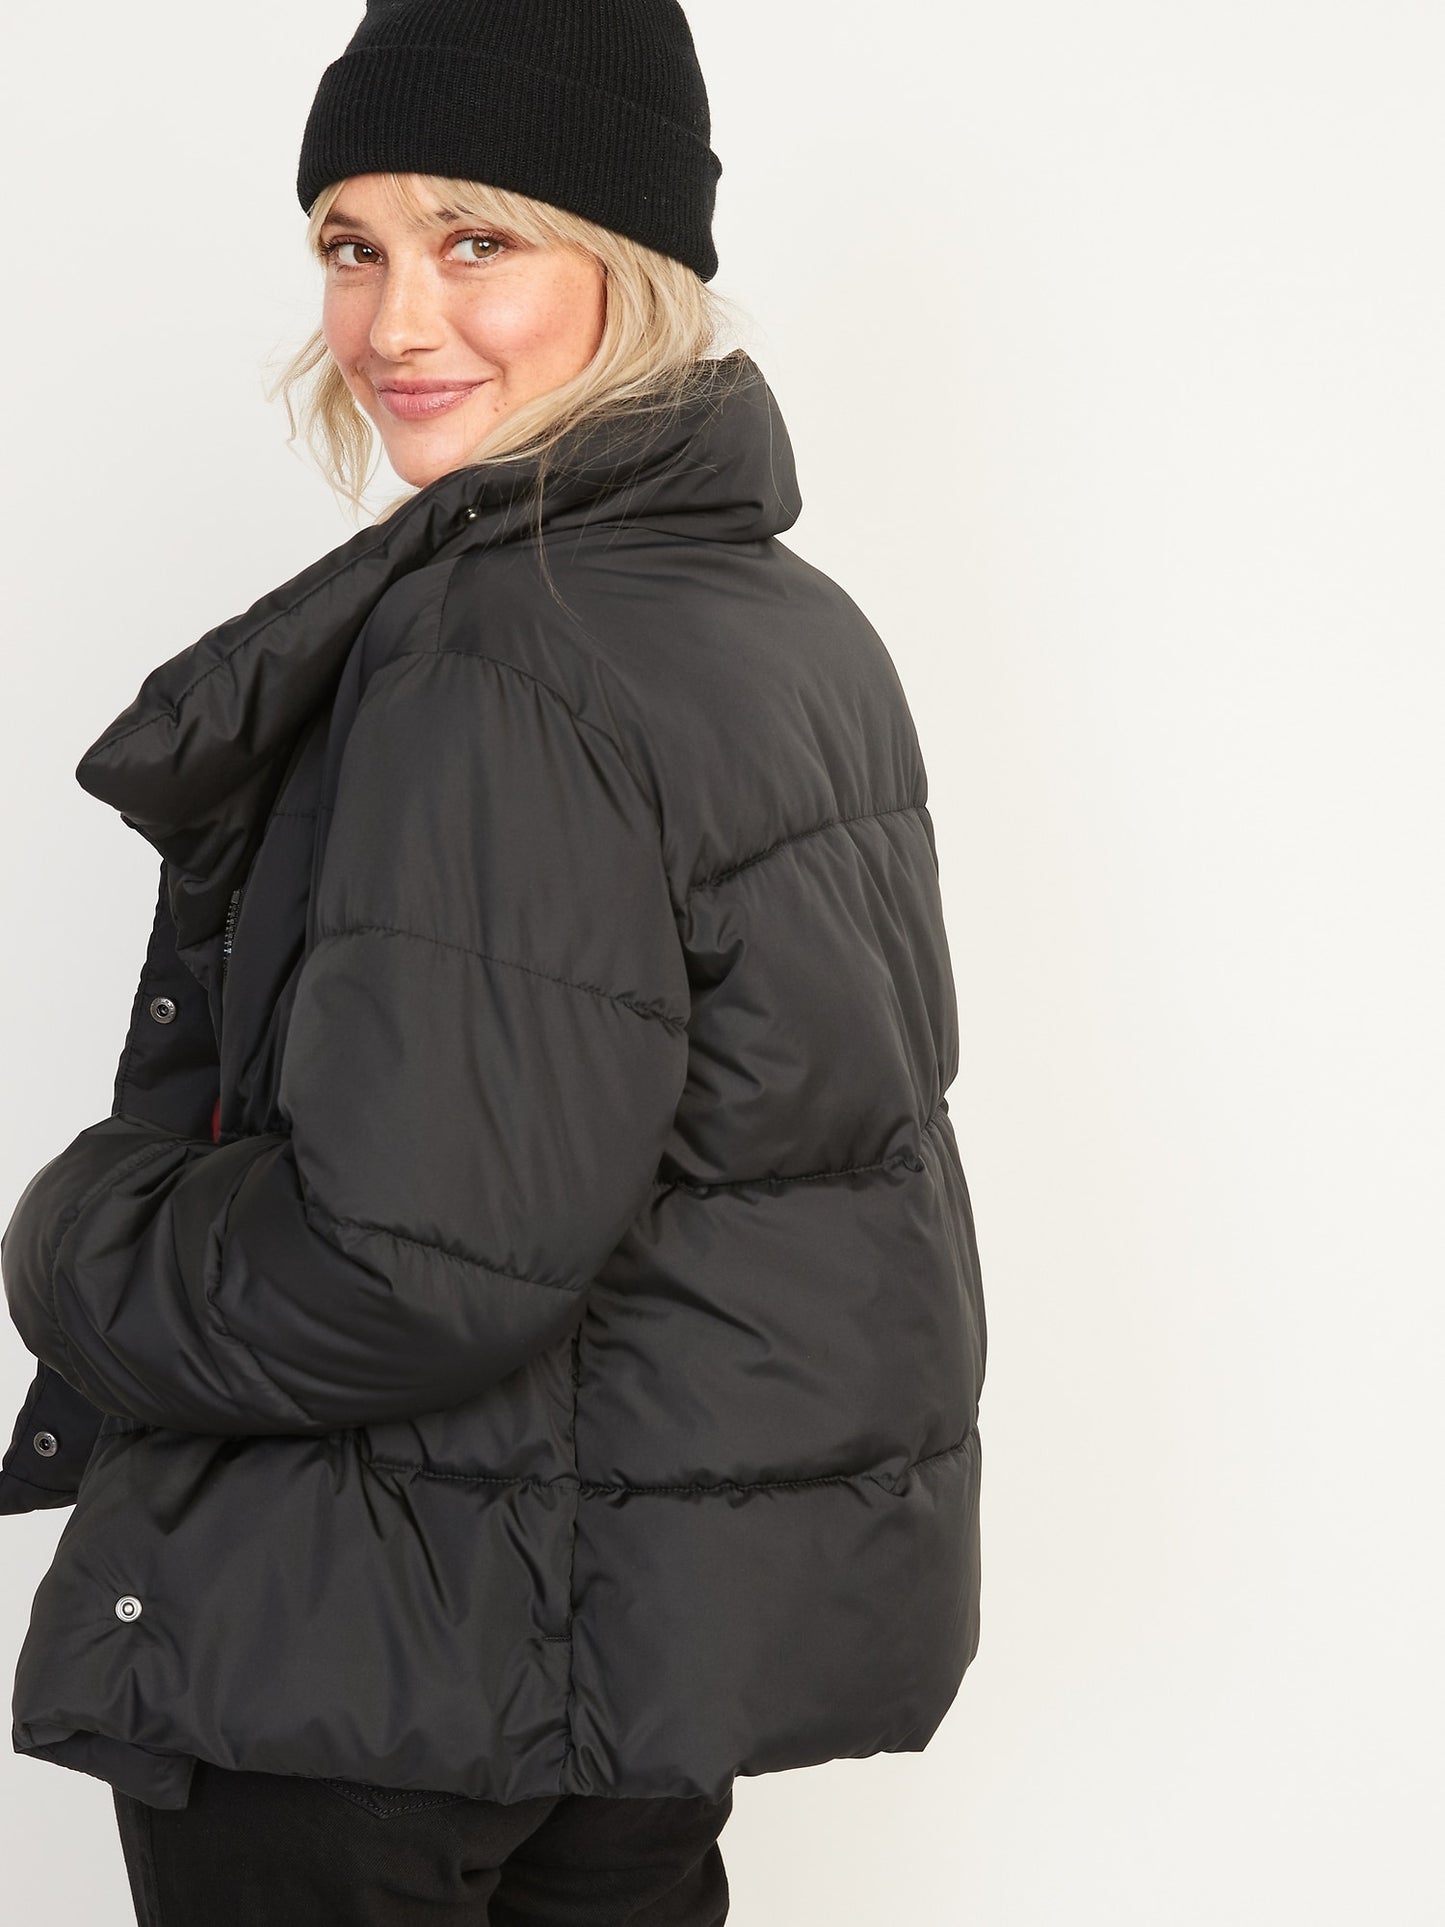 ON Water-Resistant Double-Breasted Puffer Jacket For Women - Black Jack